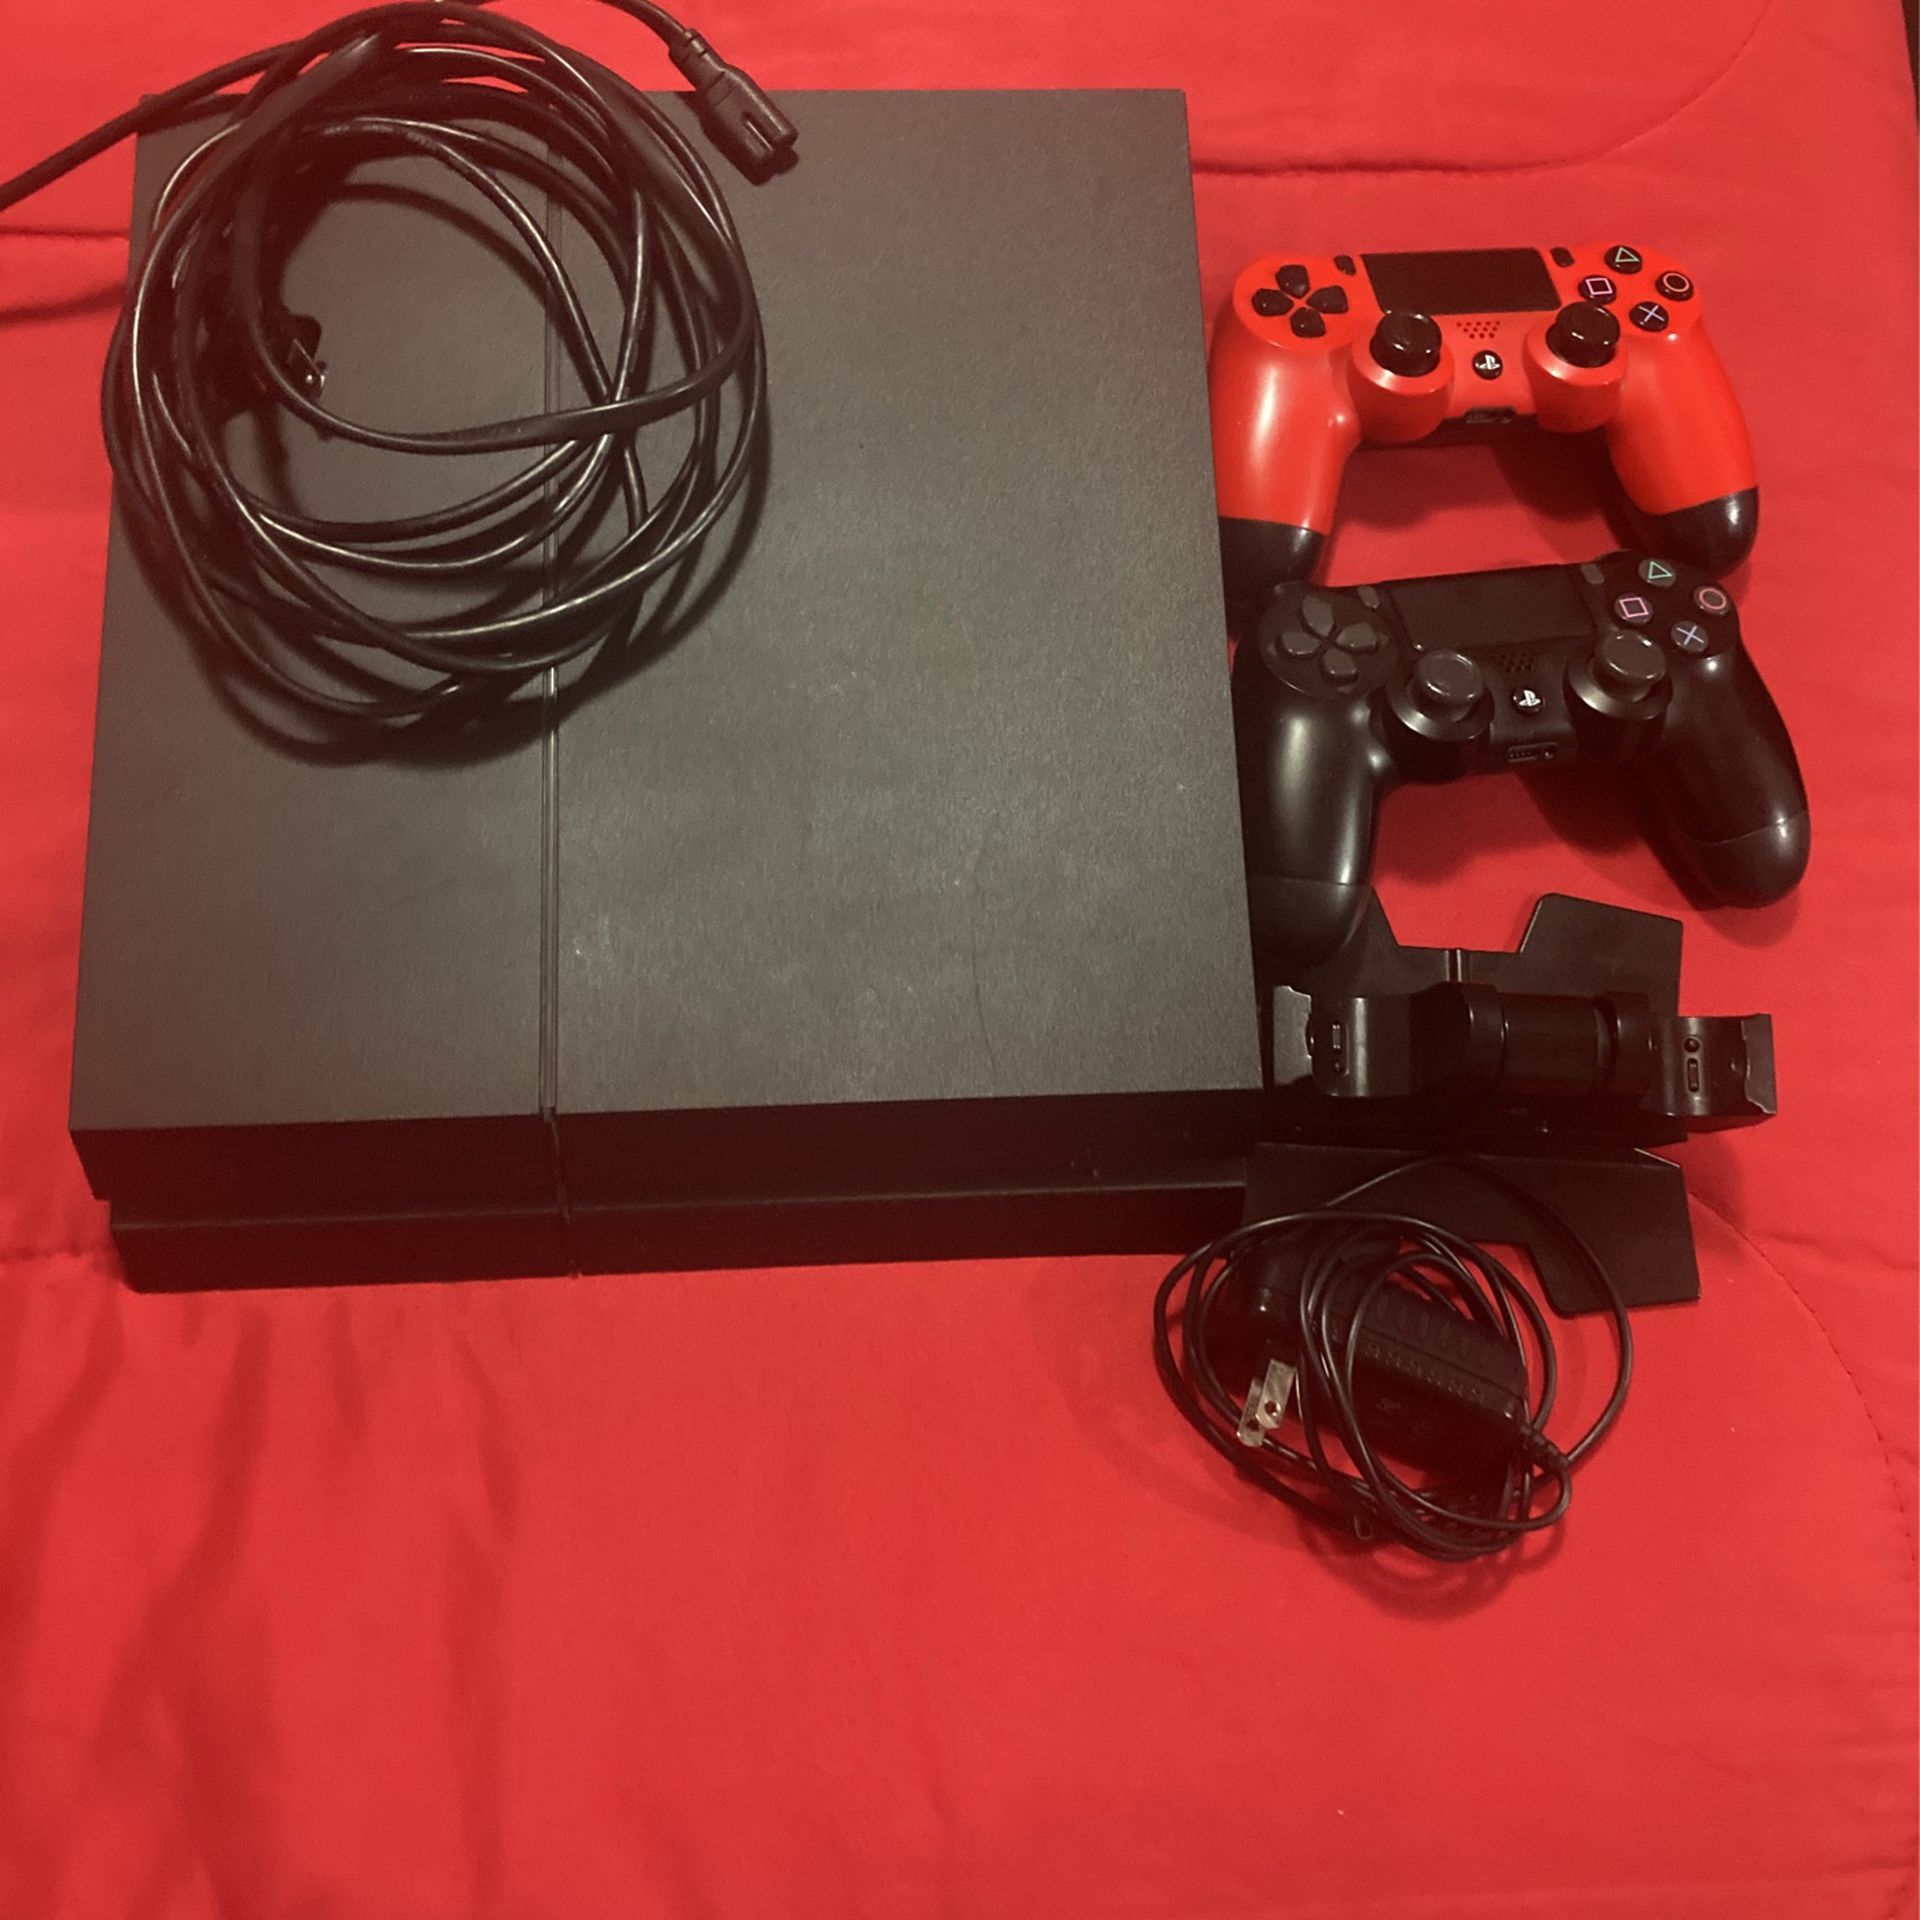 Ps4 W/ 2 Controllers And Charging Stand